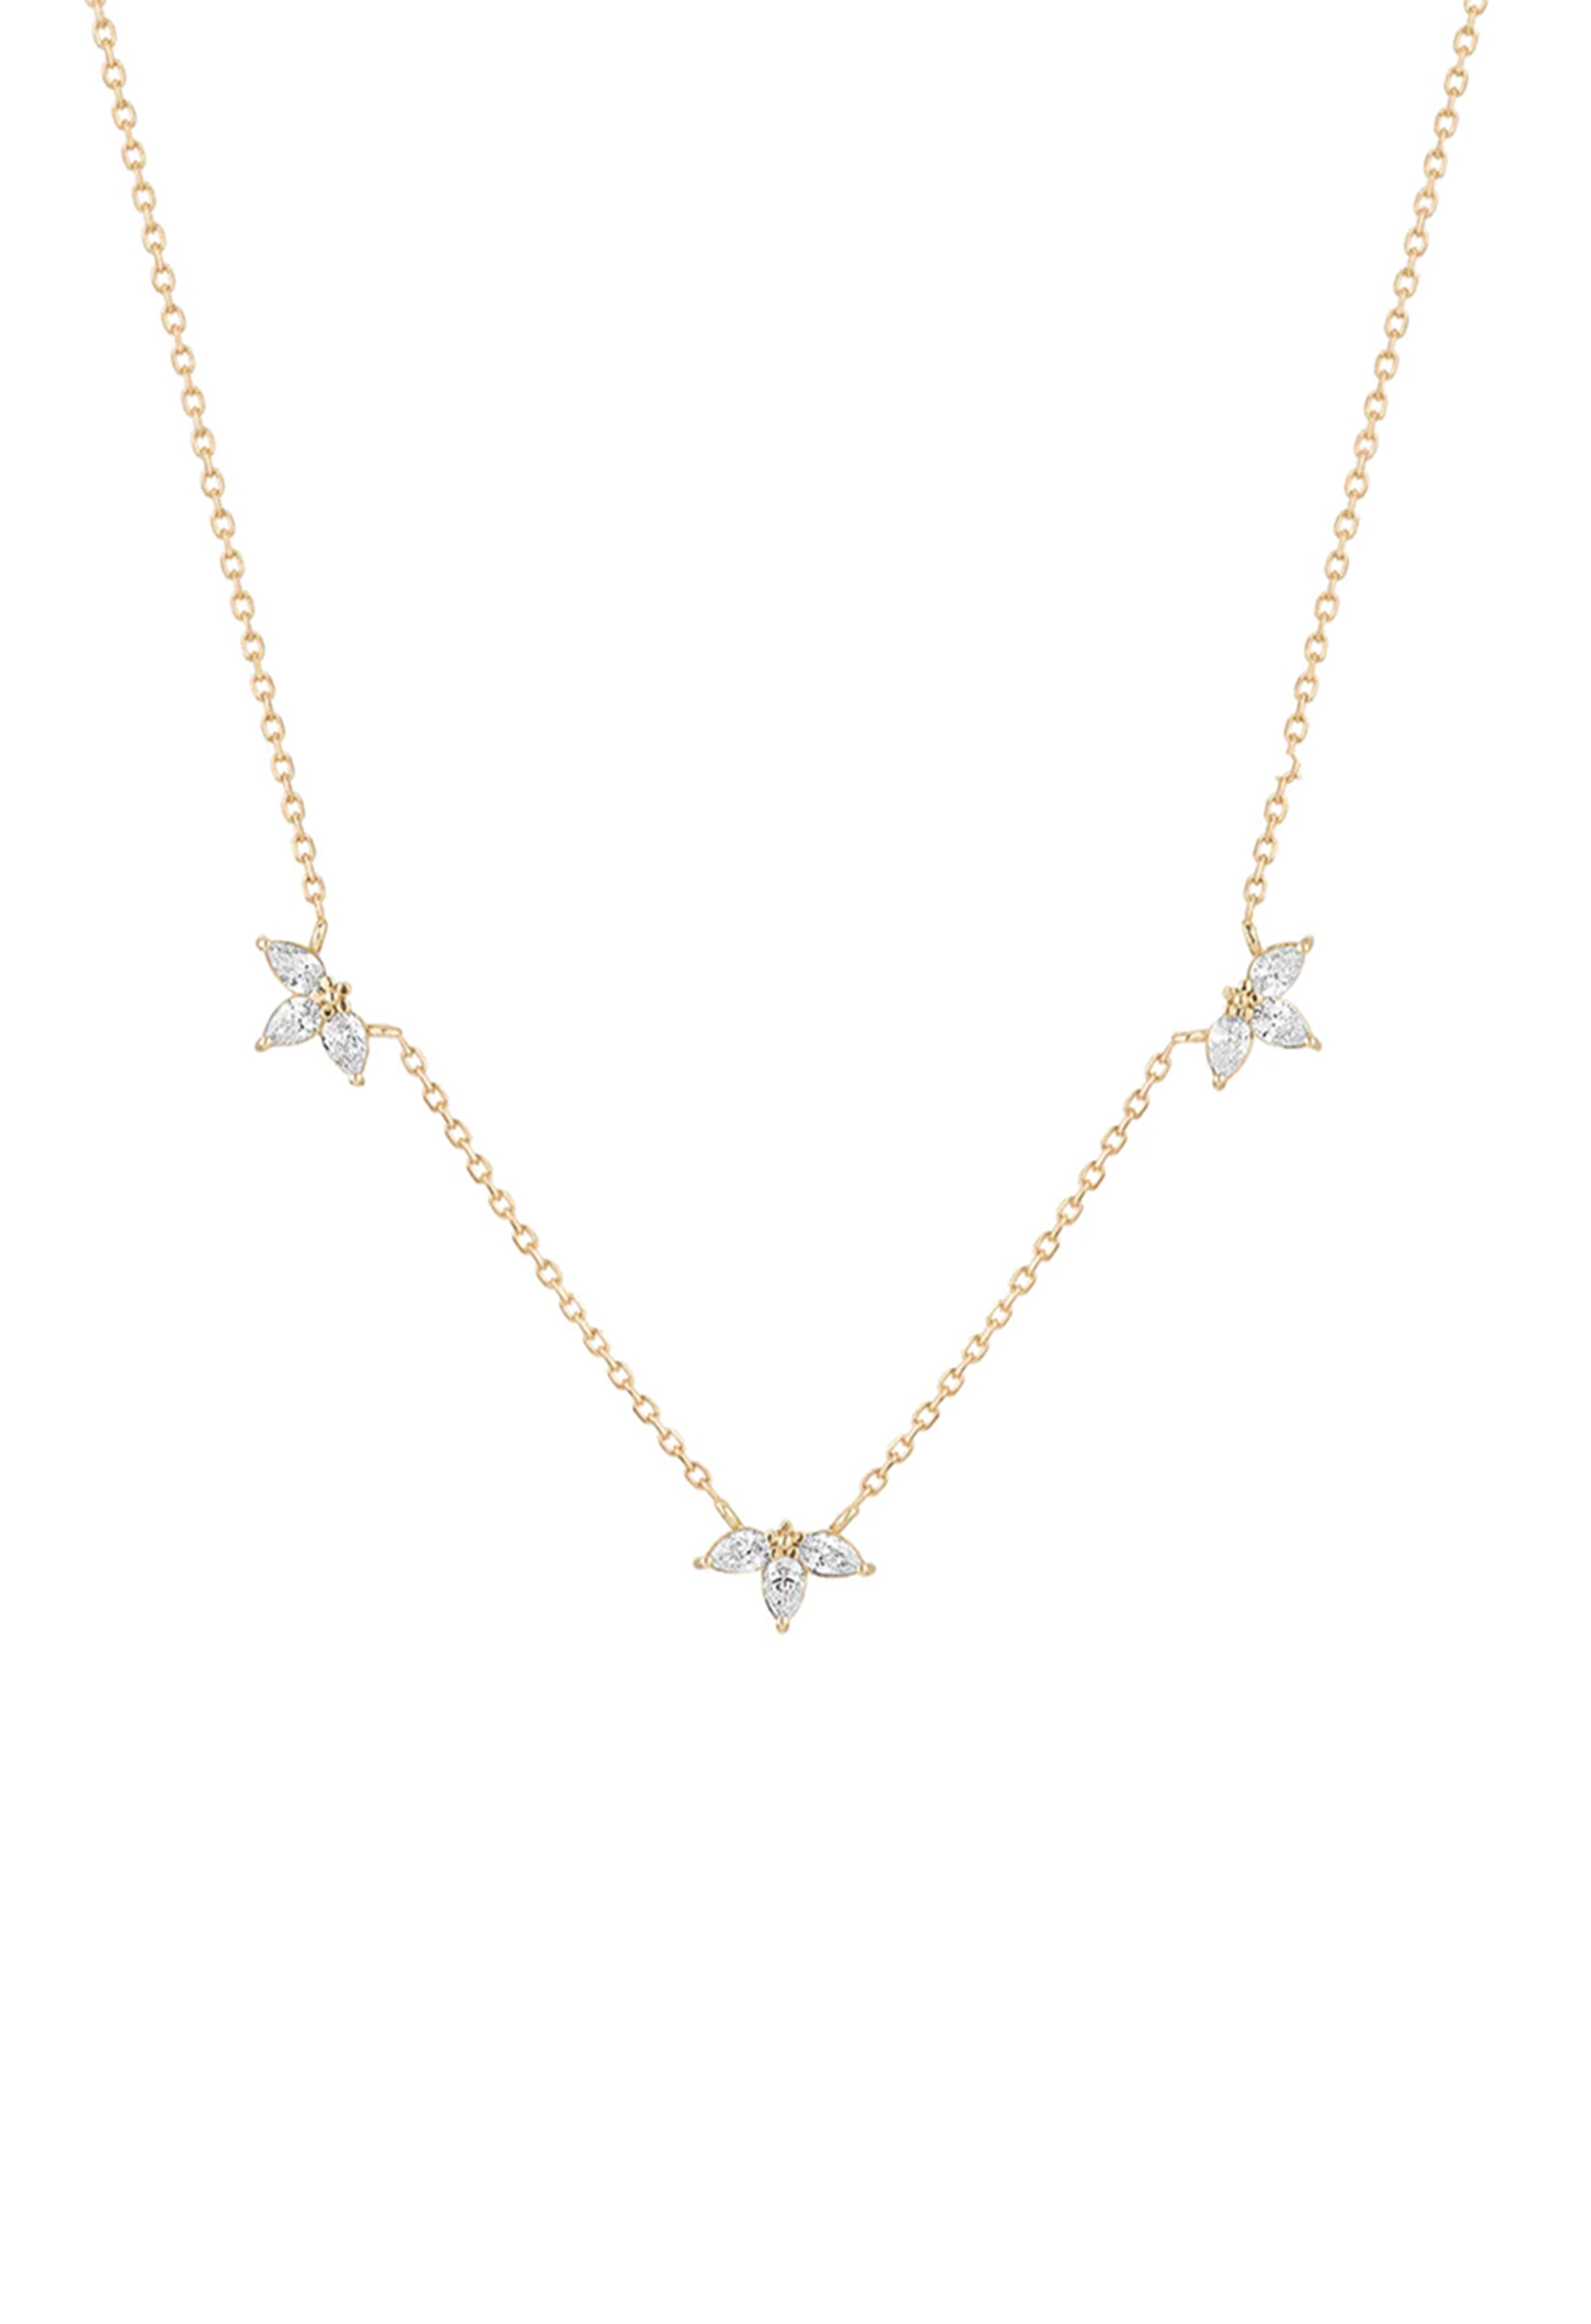 Stardust Cluster Necklace